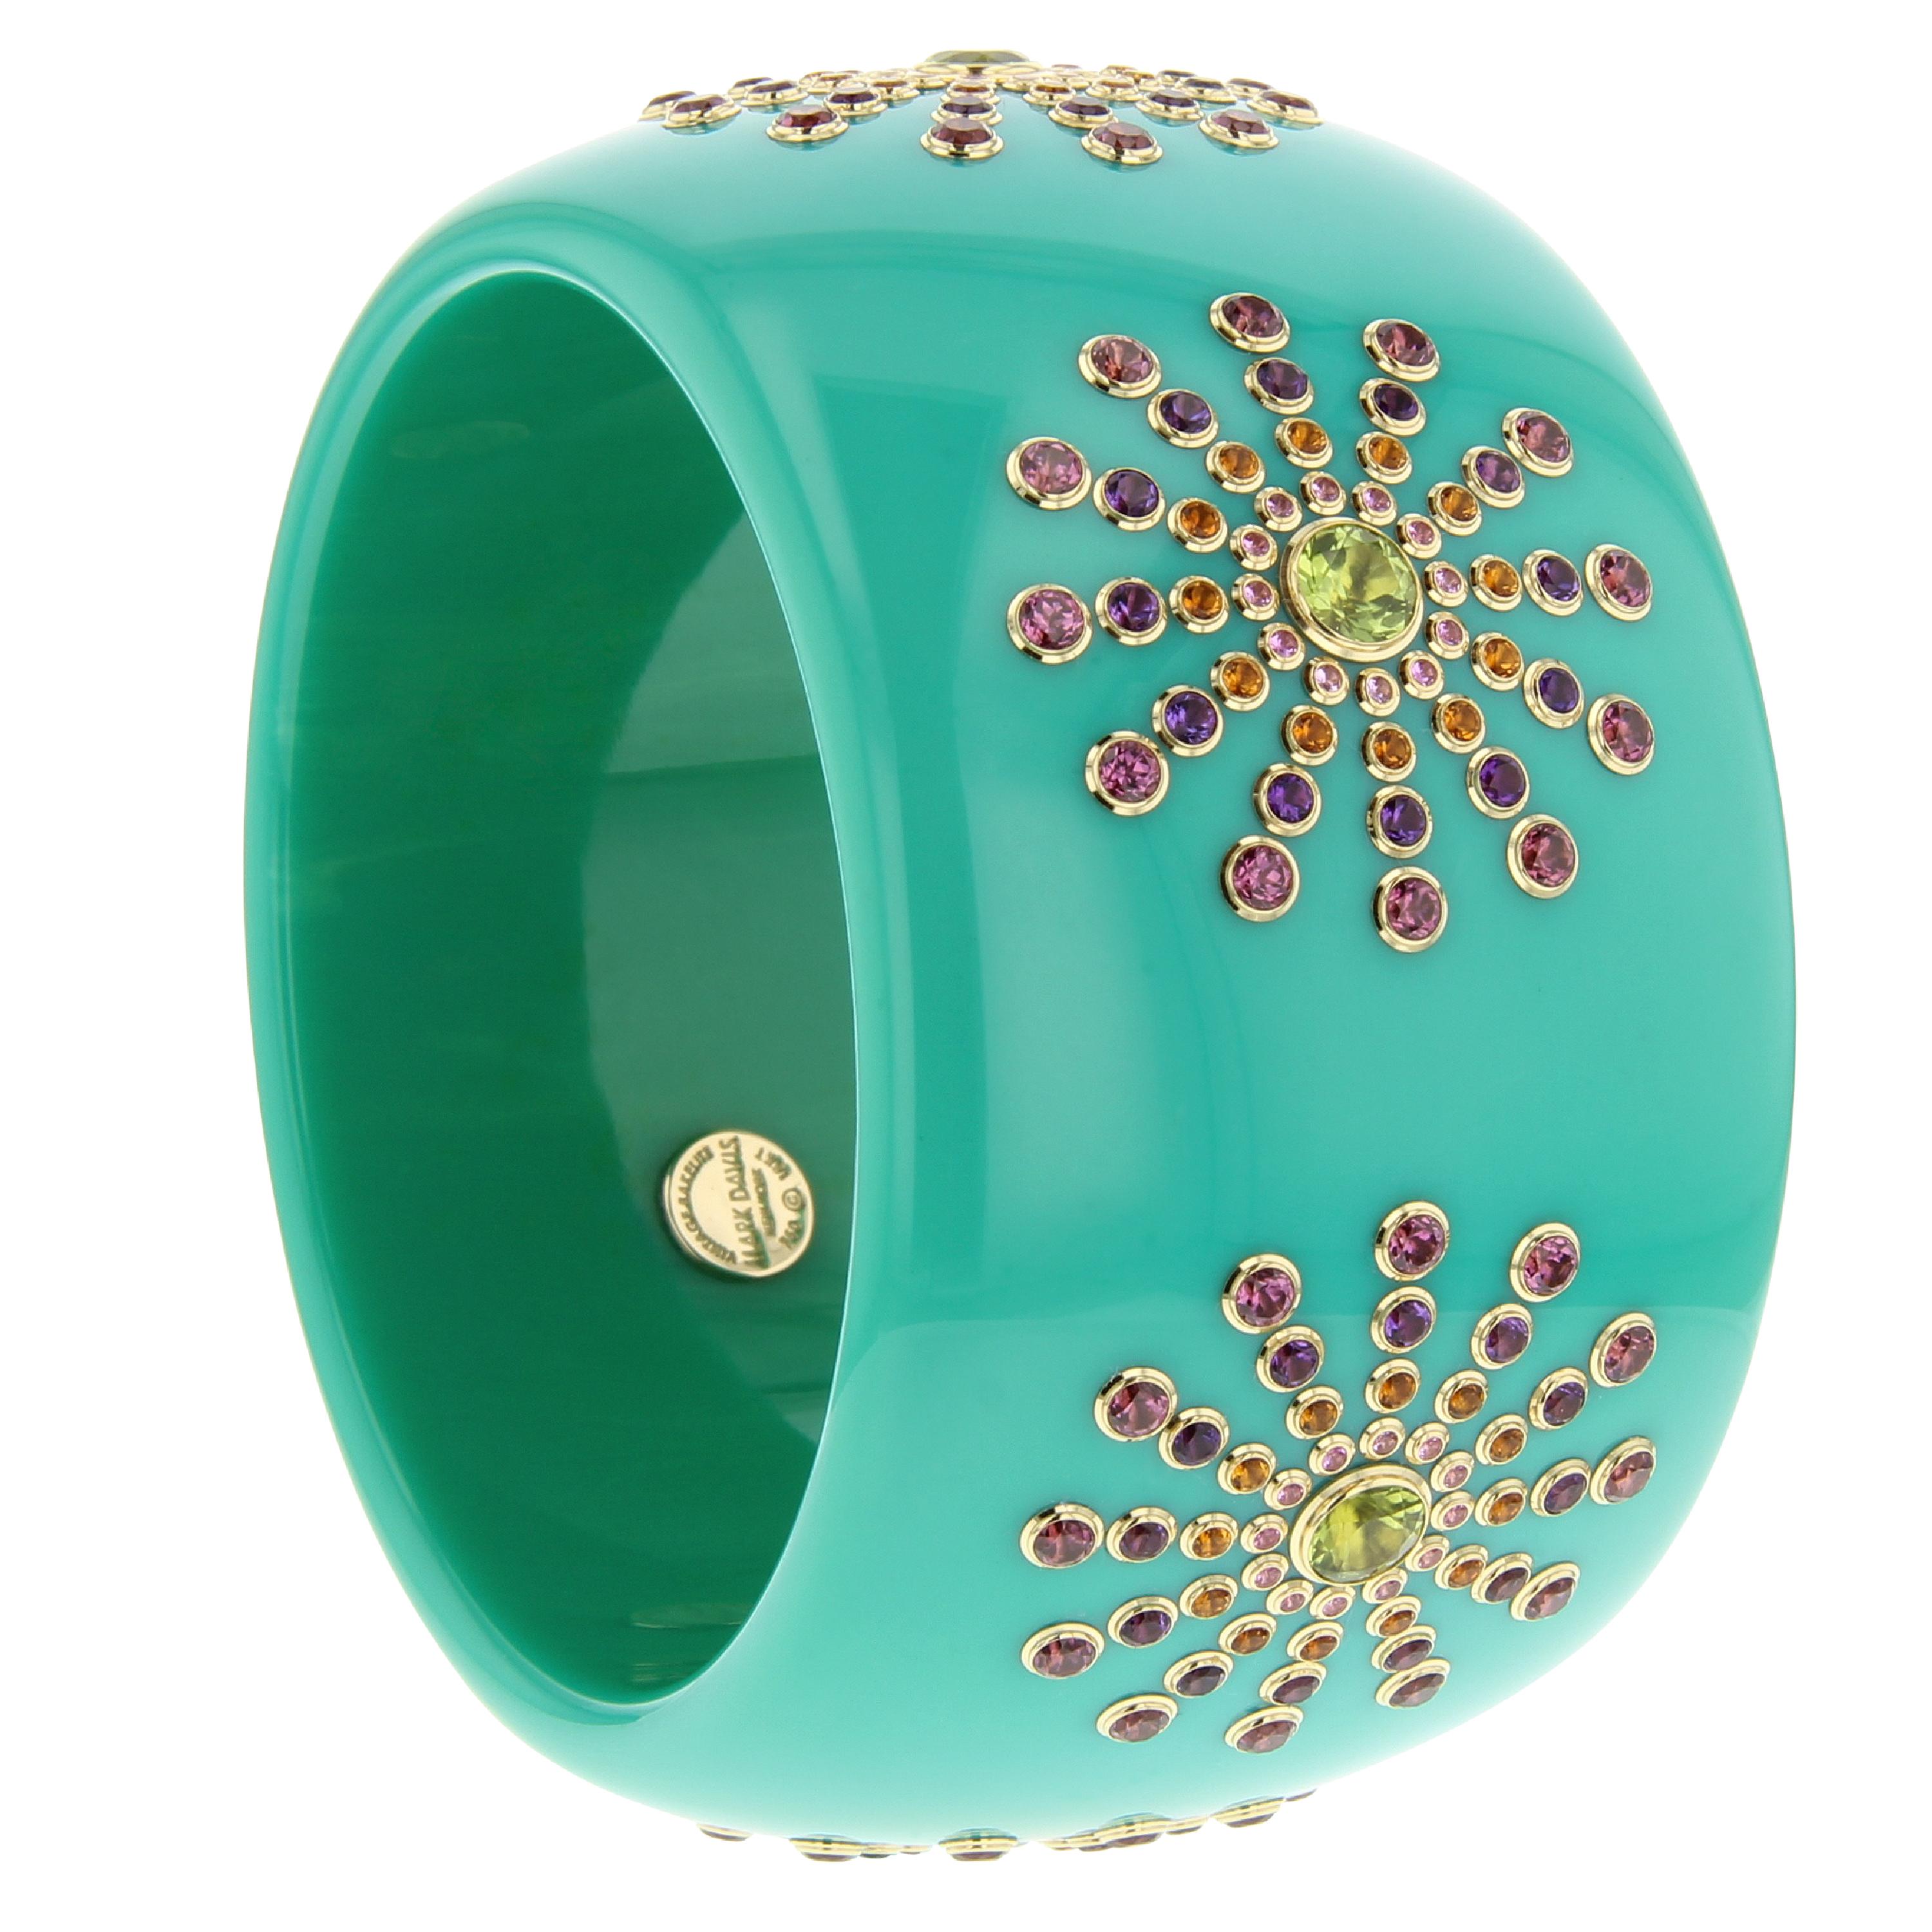 This substantial Mark Davis bangle was made from vintage turquoise bakelite. The bakelite is not marbled and the focus is entirely on the starburst pattern that repeats six times around the bracelet. The center of each starburst features a large